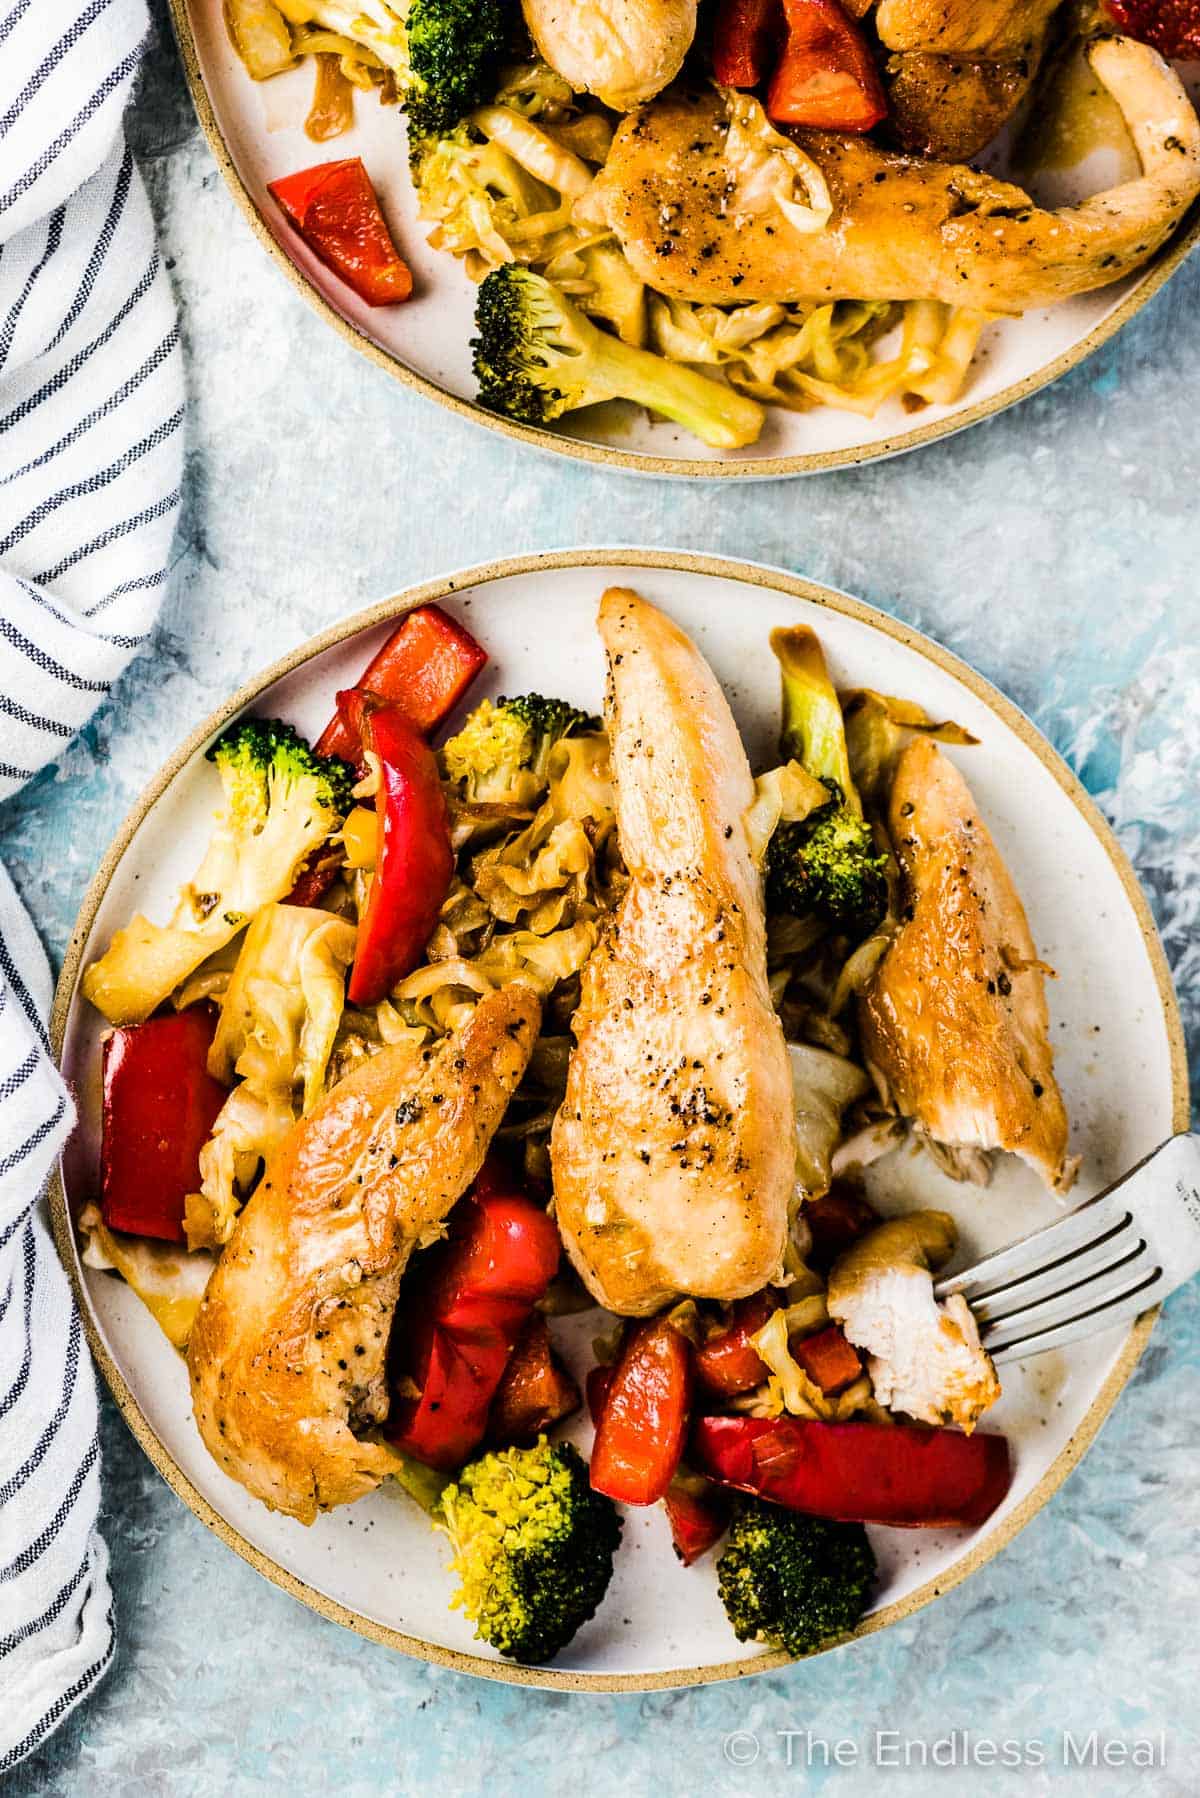 Chicken and cabbage stir fry on a plate with a fork taking a bite,